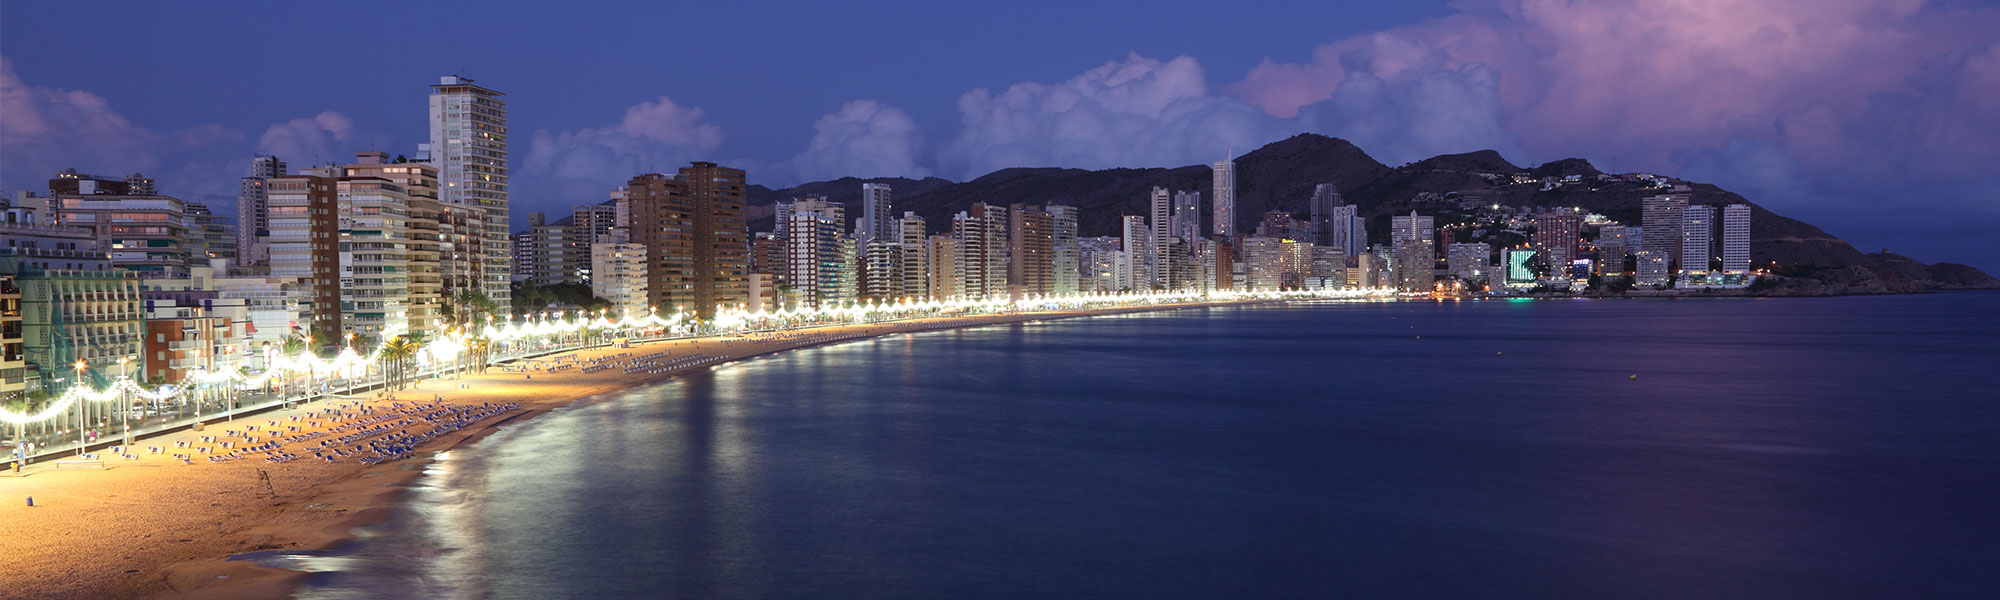 tourhub | Just Go Holidays | Christmas & New Year in Benidorm - All Inclusive 